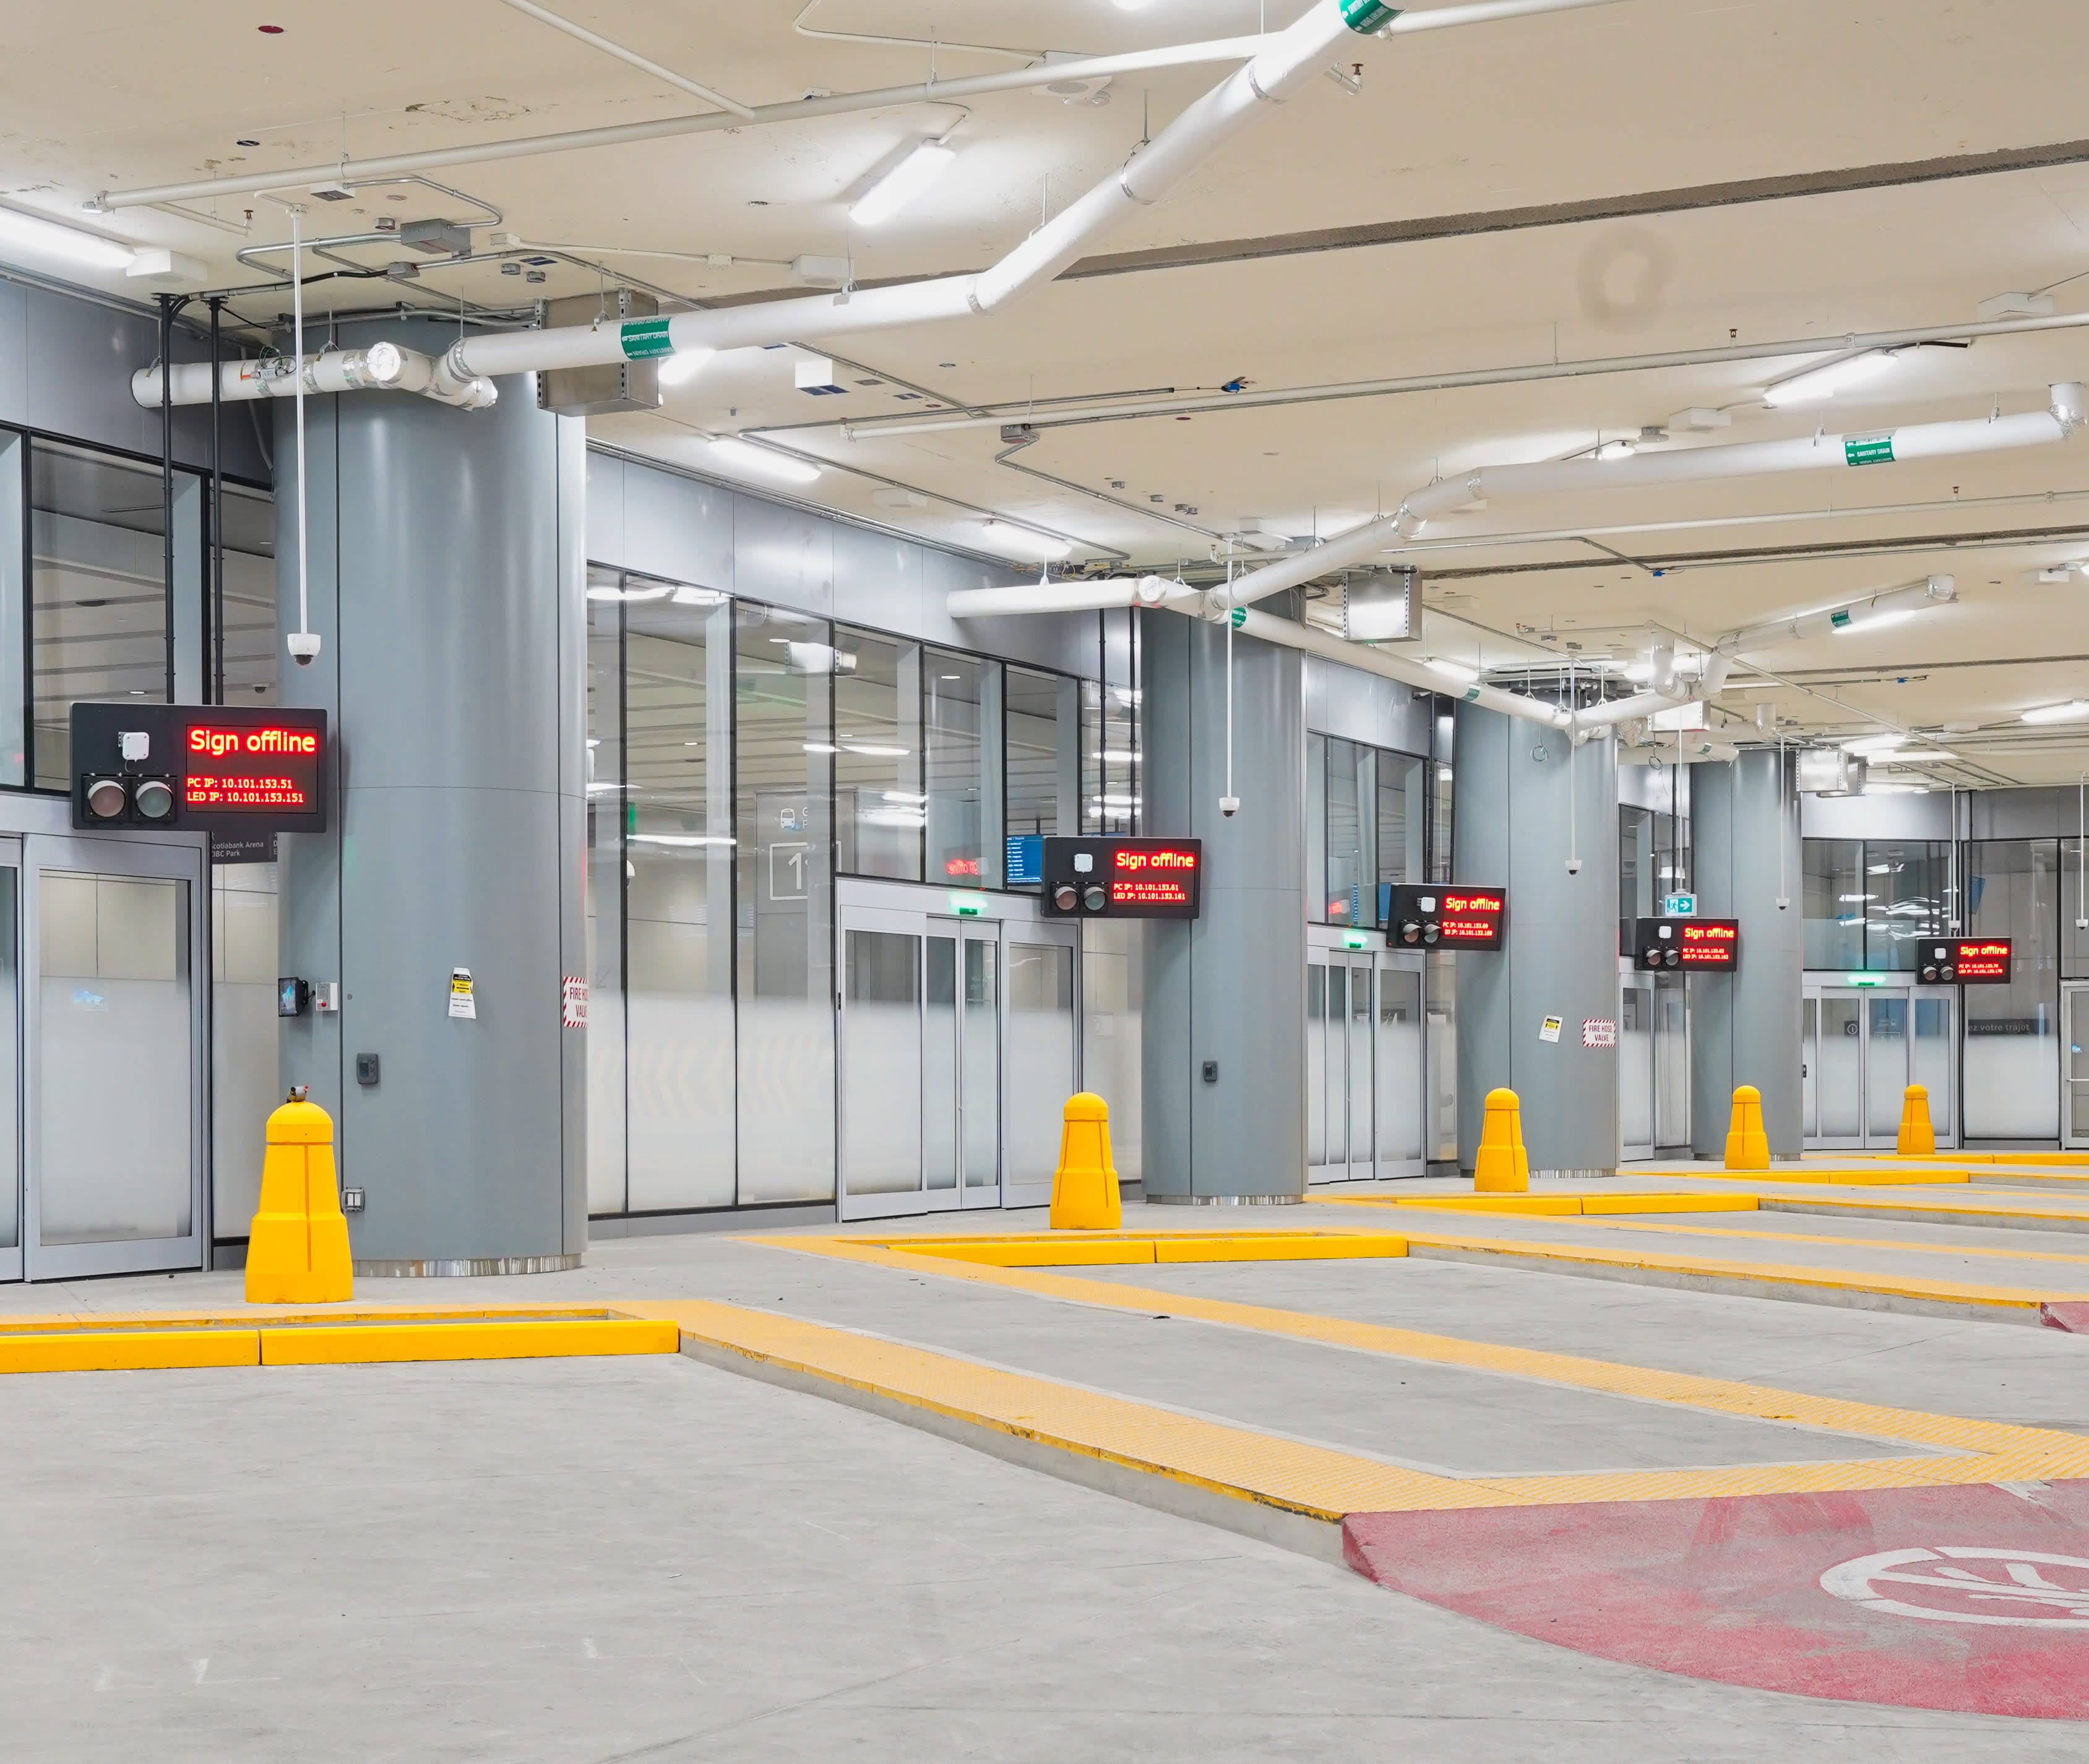 the departure bays where the buses will be parked when loading and unloading